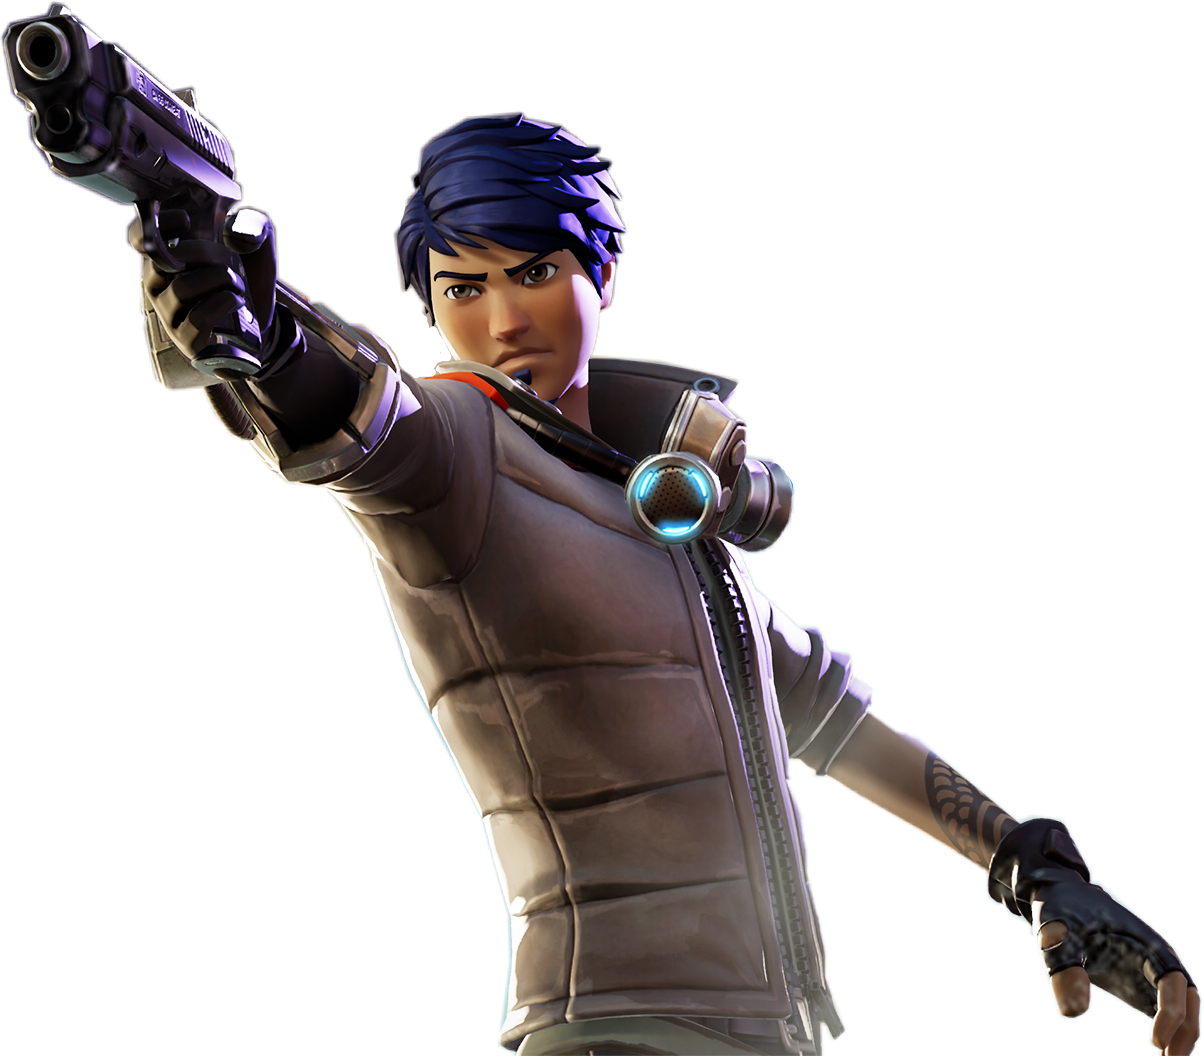 Download Fortnite Characters Png Fortnite John Wick Skin Png Image With No Background Pngkey Com